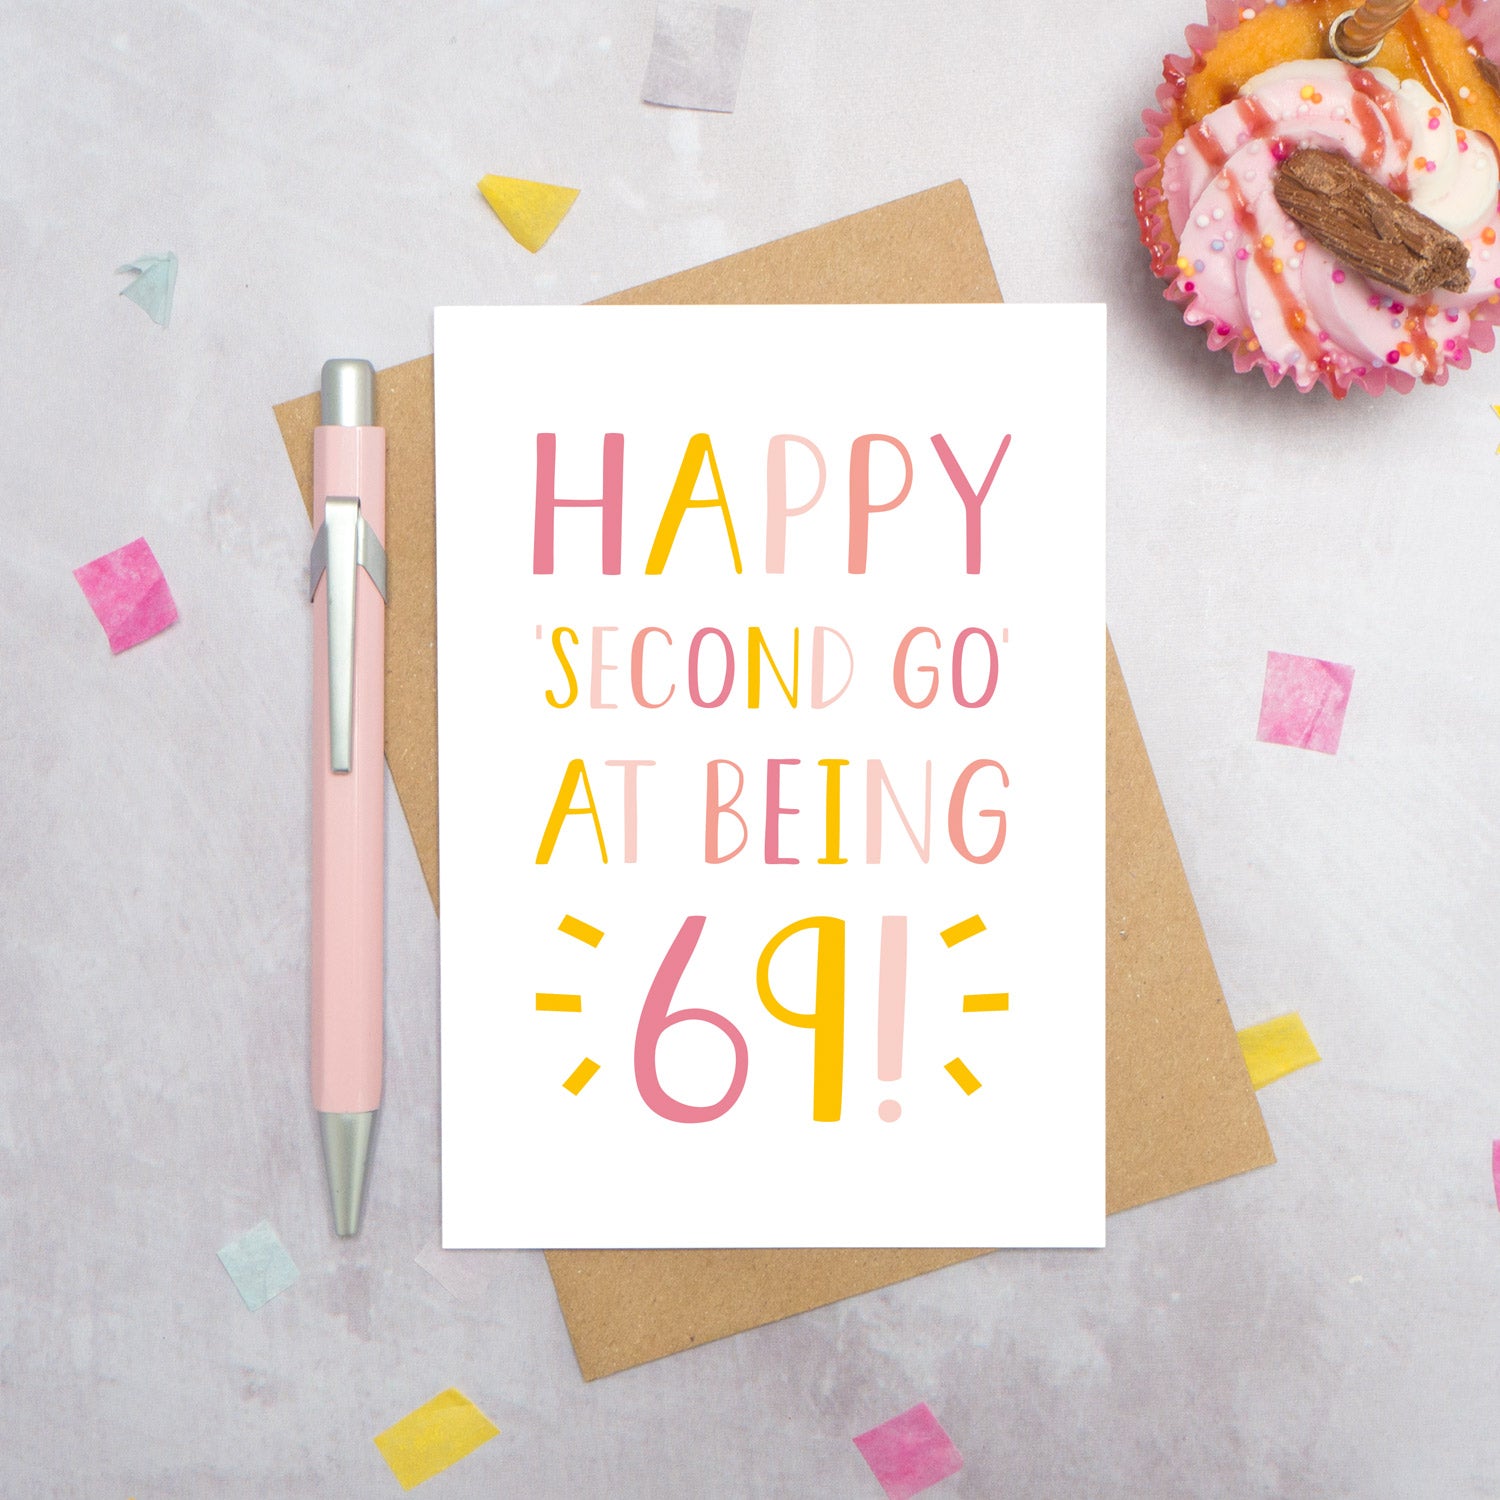 Happy second go at being 69 - milestone age card in pink photographed on a grey background surrounded by a cupcake, pen and confetti.